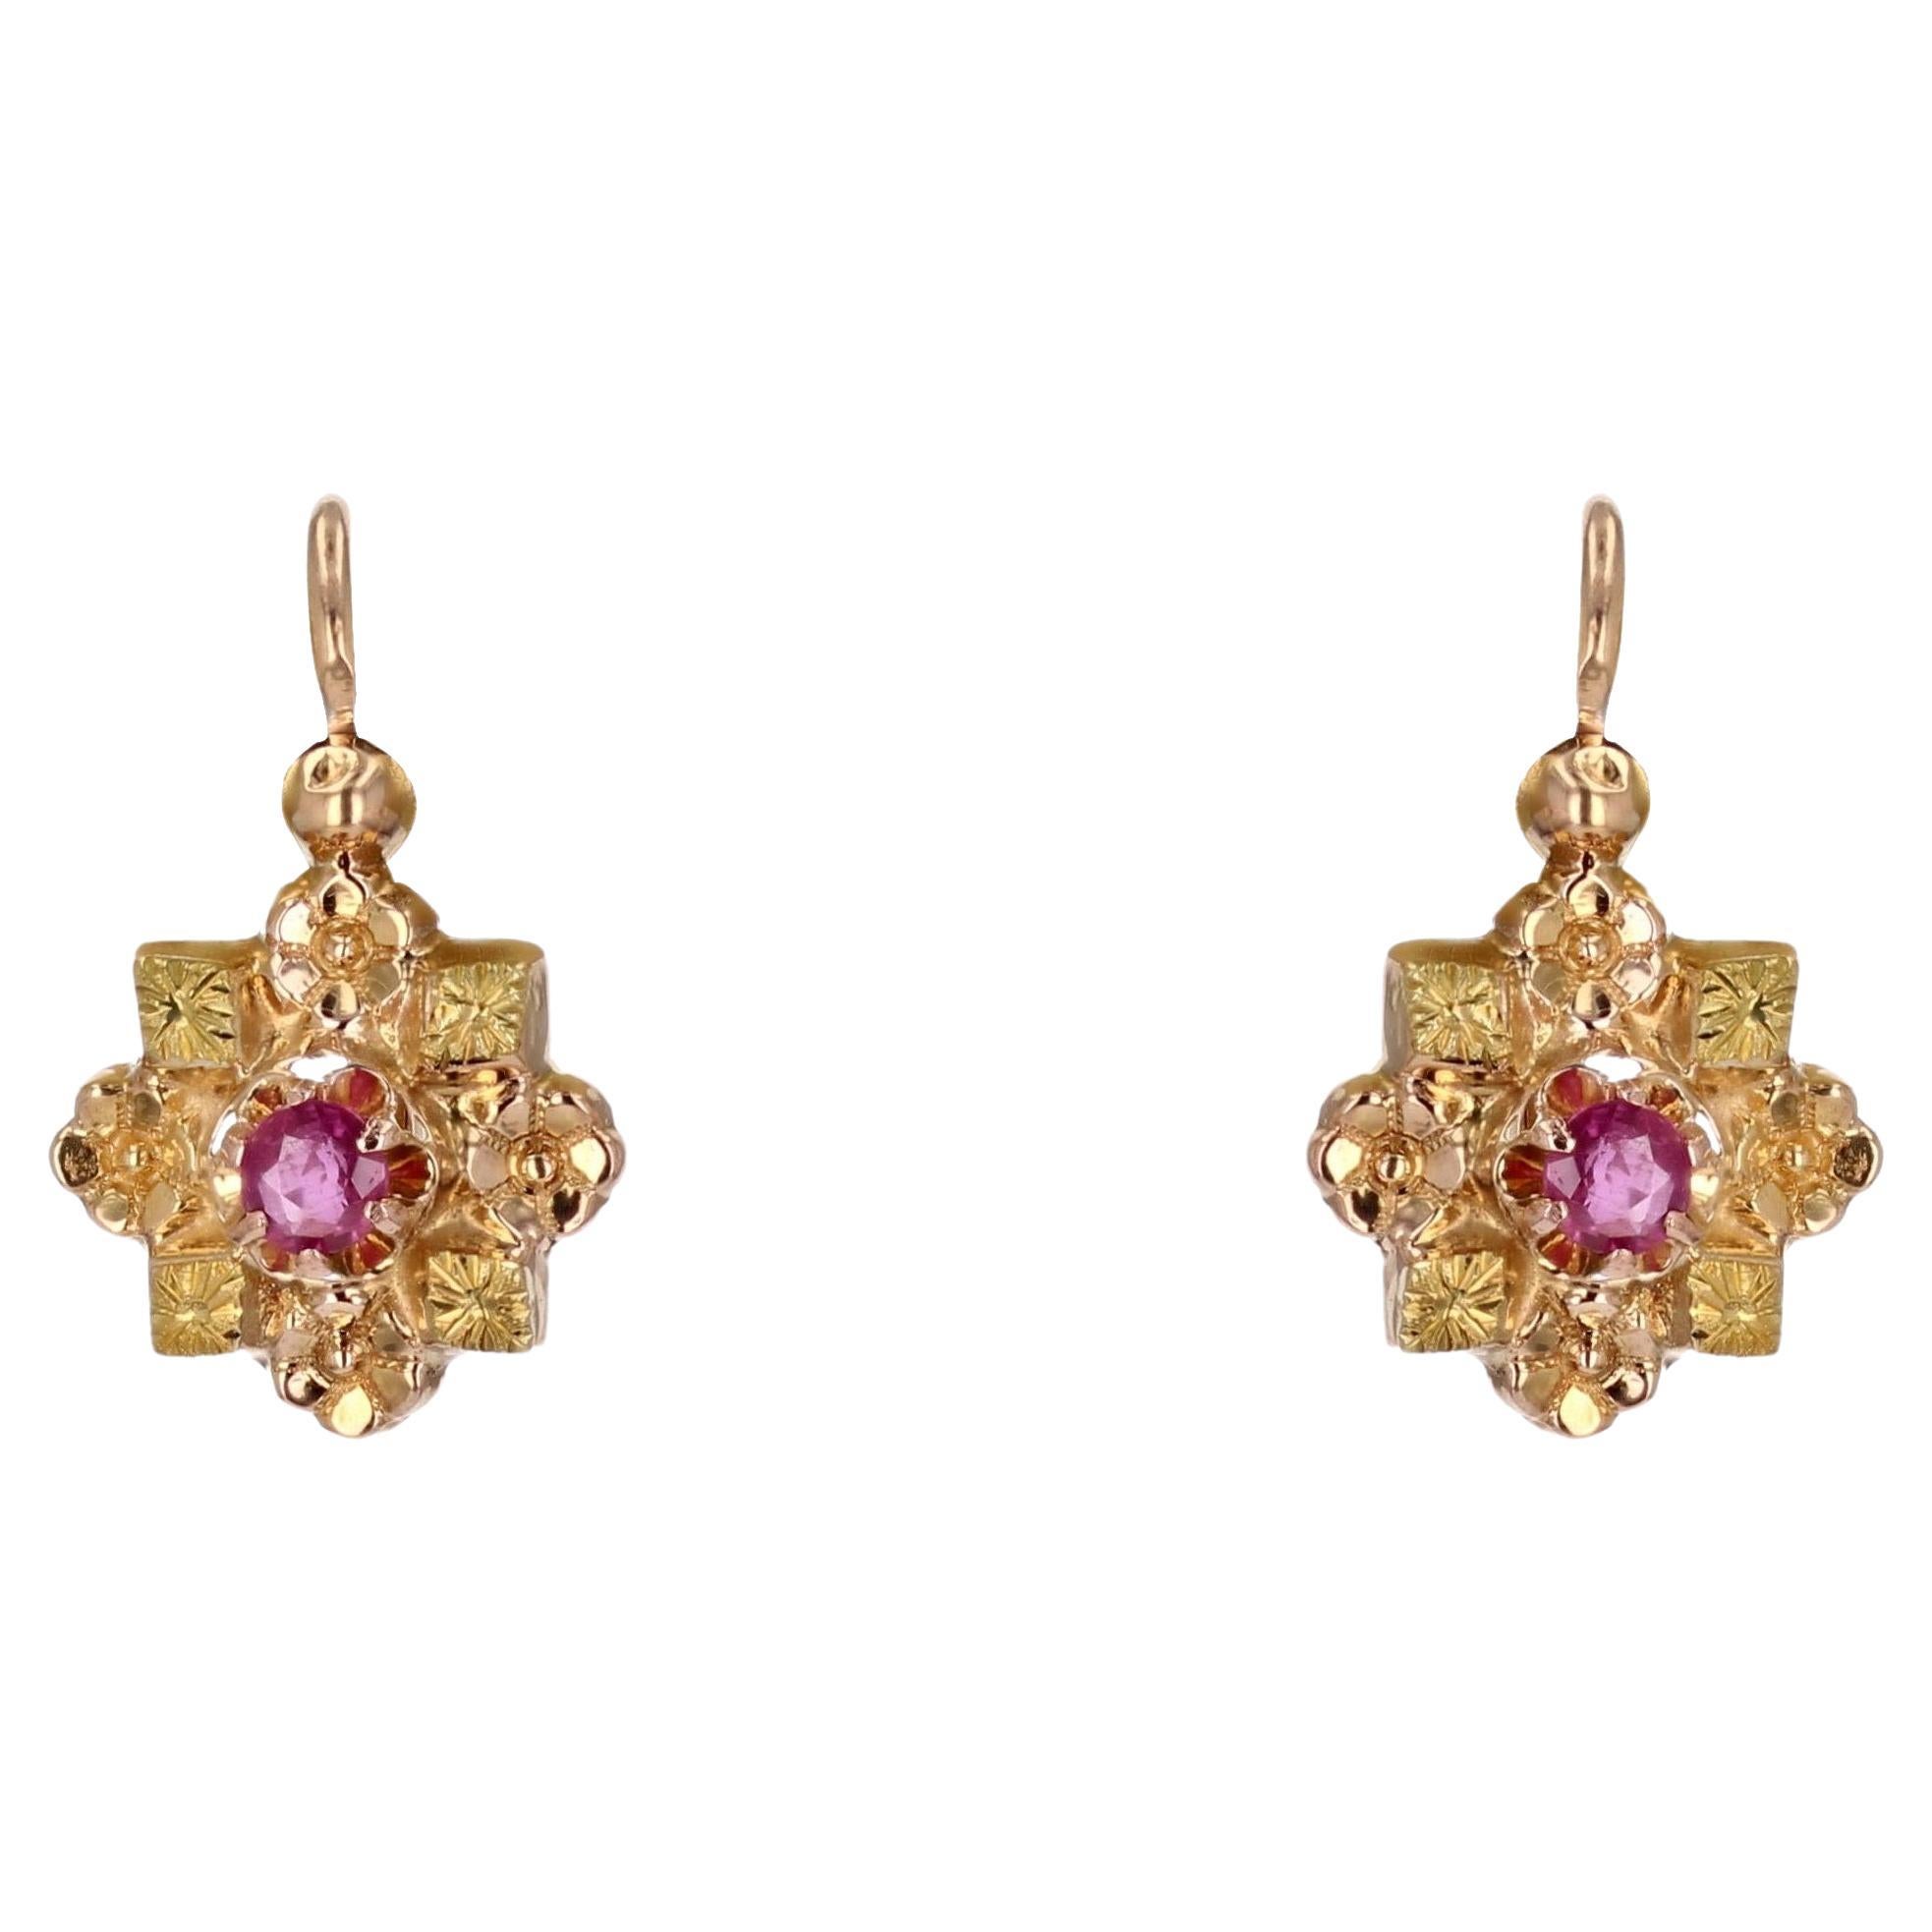 French 20th Century Rubies 18 Karat Rose and Green Gold Lever-back Earrings